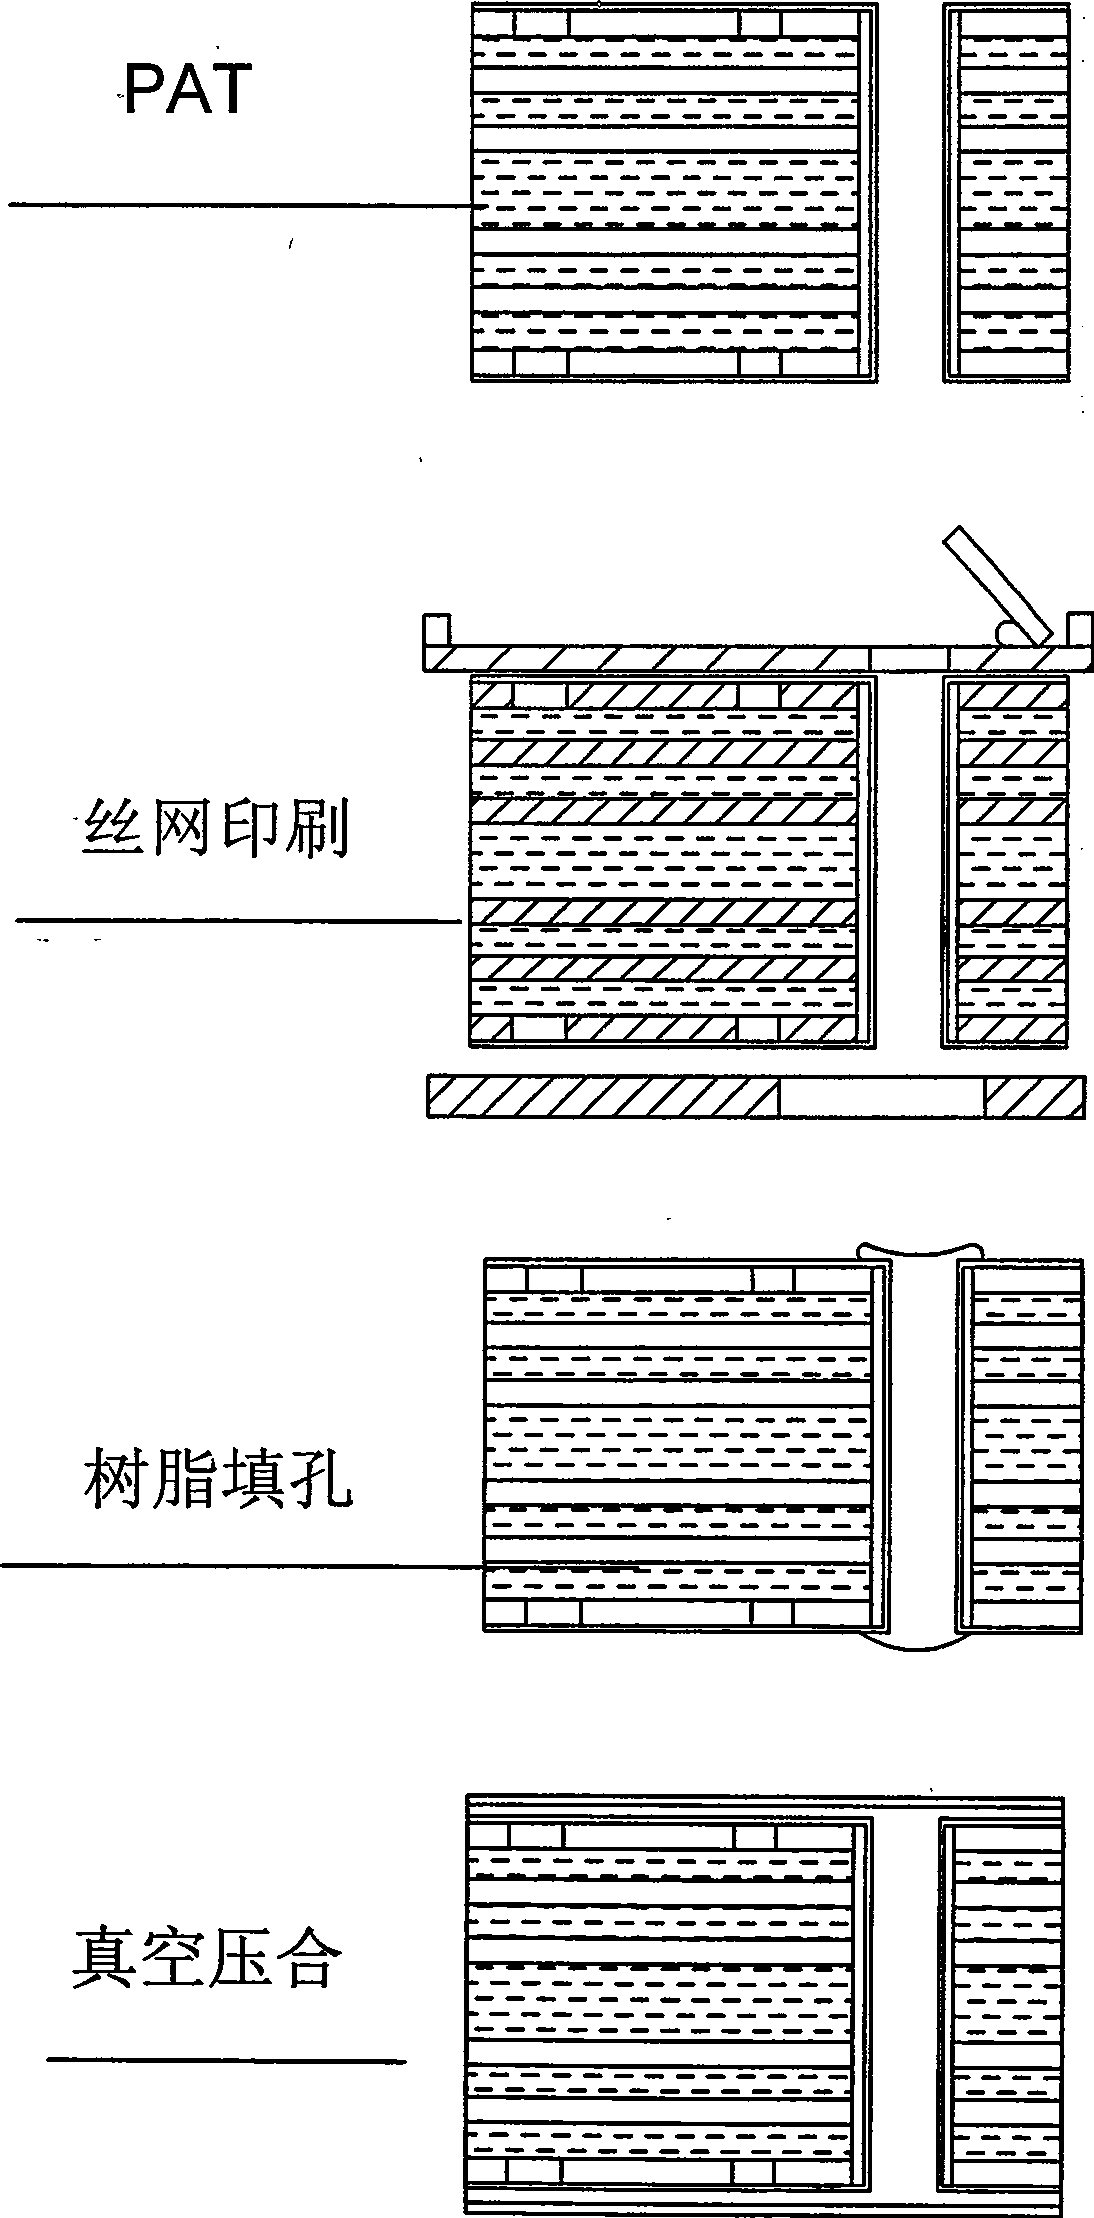 Process for blind hole, buried hole, and filled hole of multi-layered high density interconnected printed circuit board